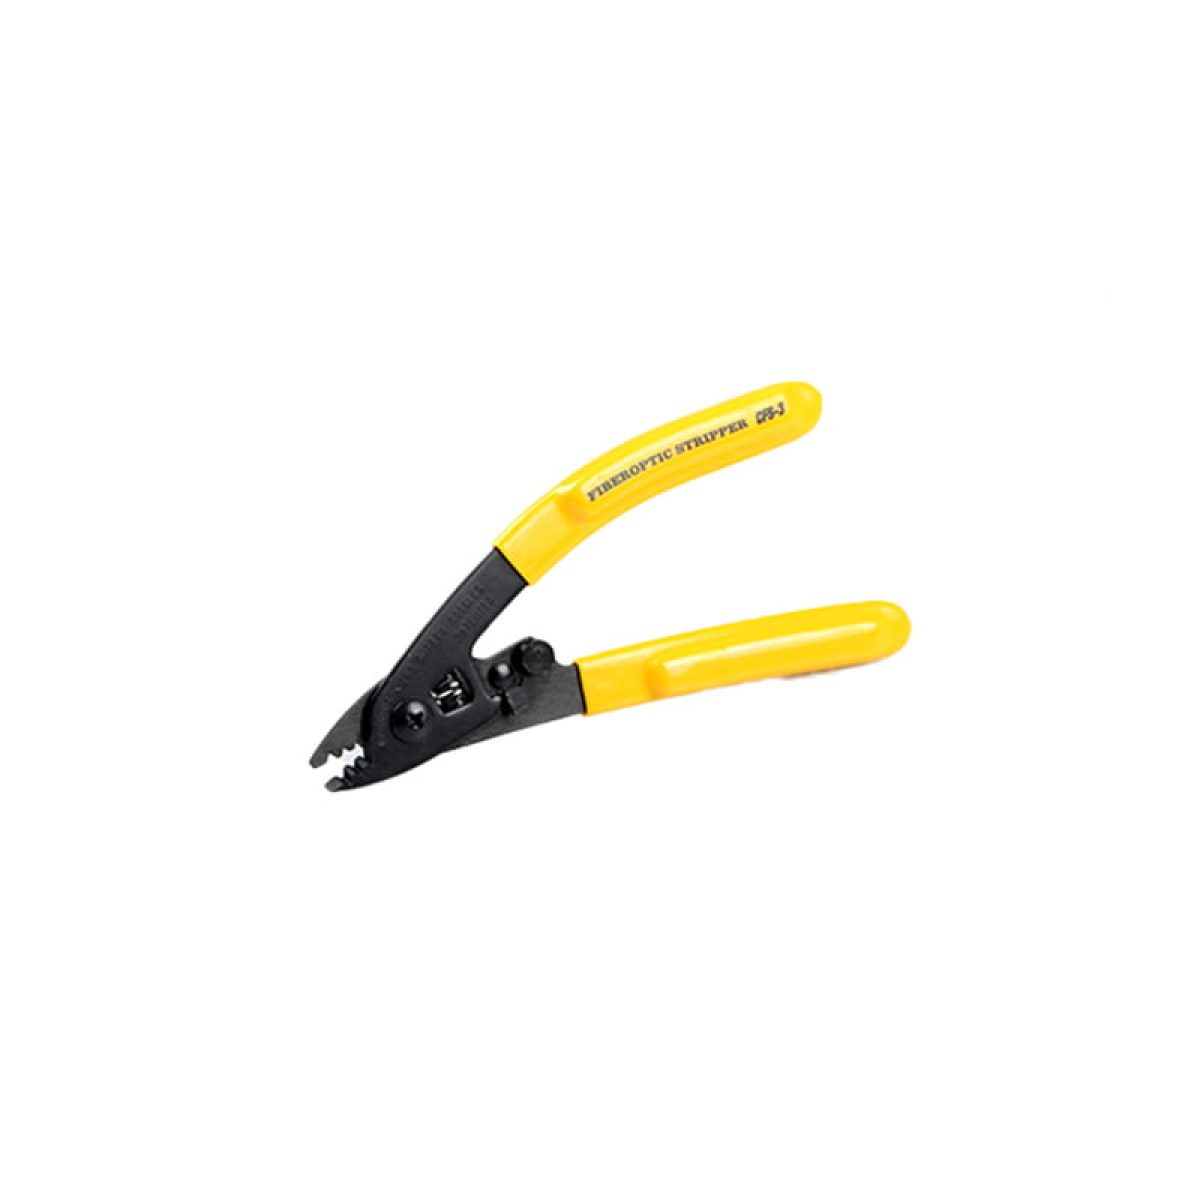 Fibre Optic Cable Splicing Terminating Stripping Tools BT Approved Tools